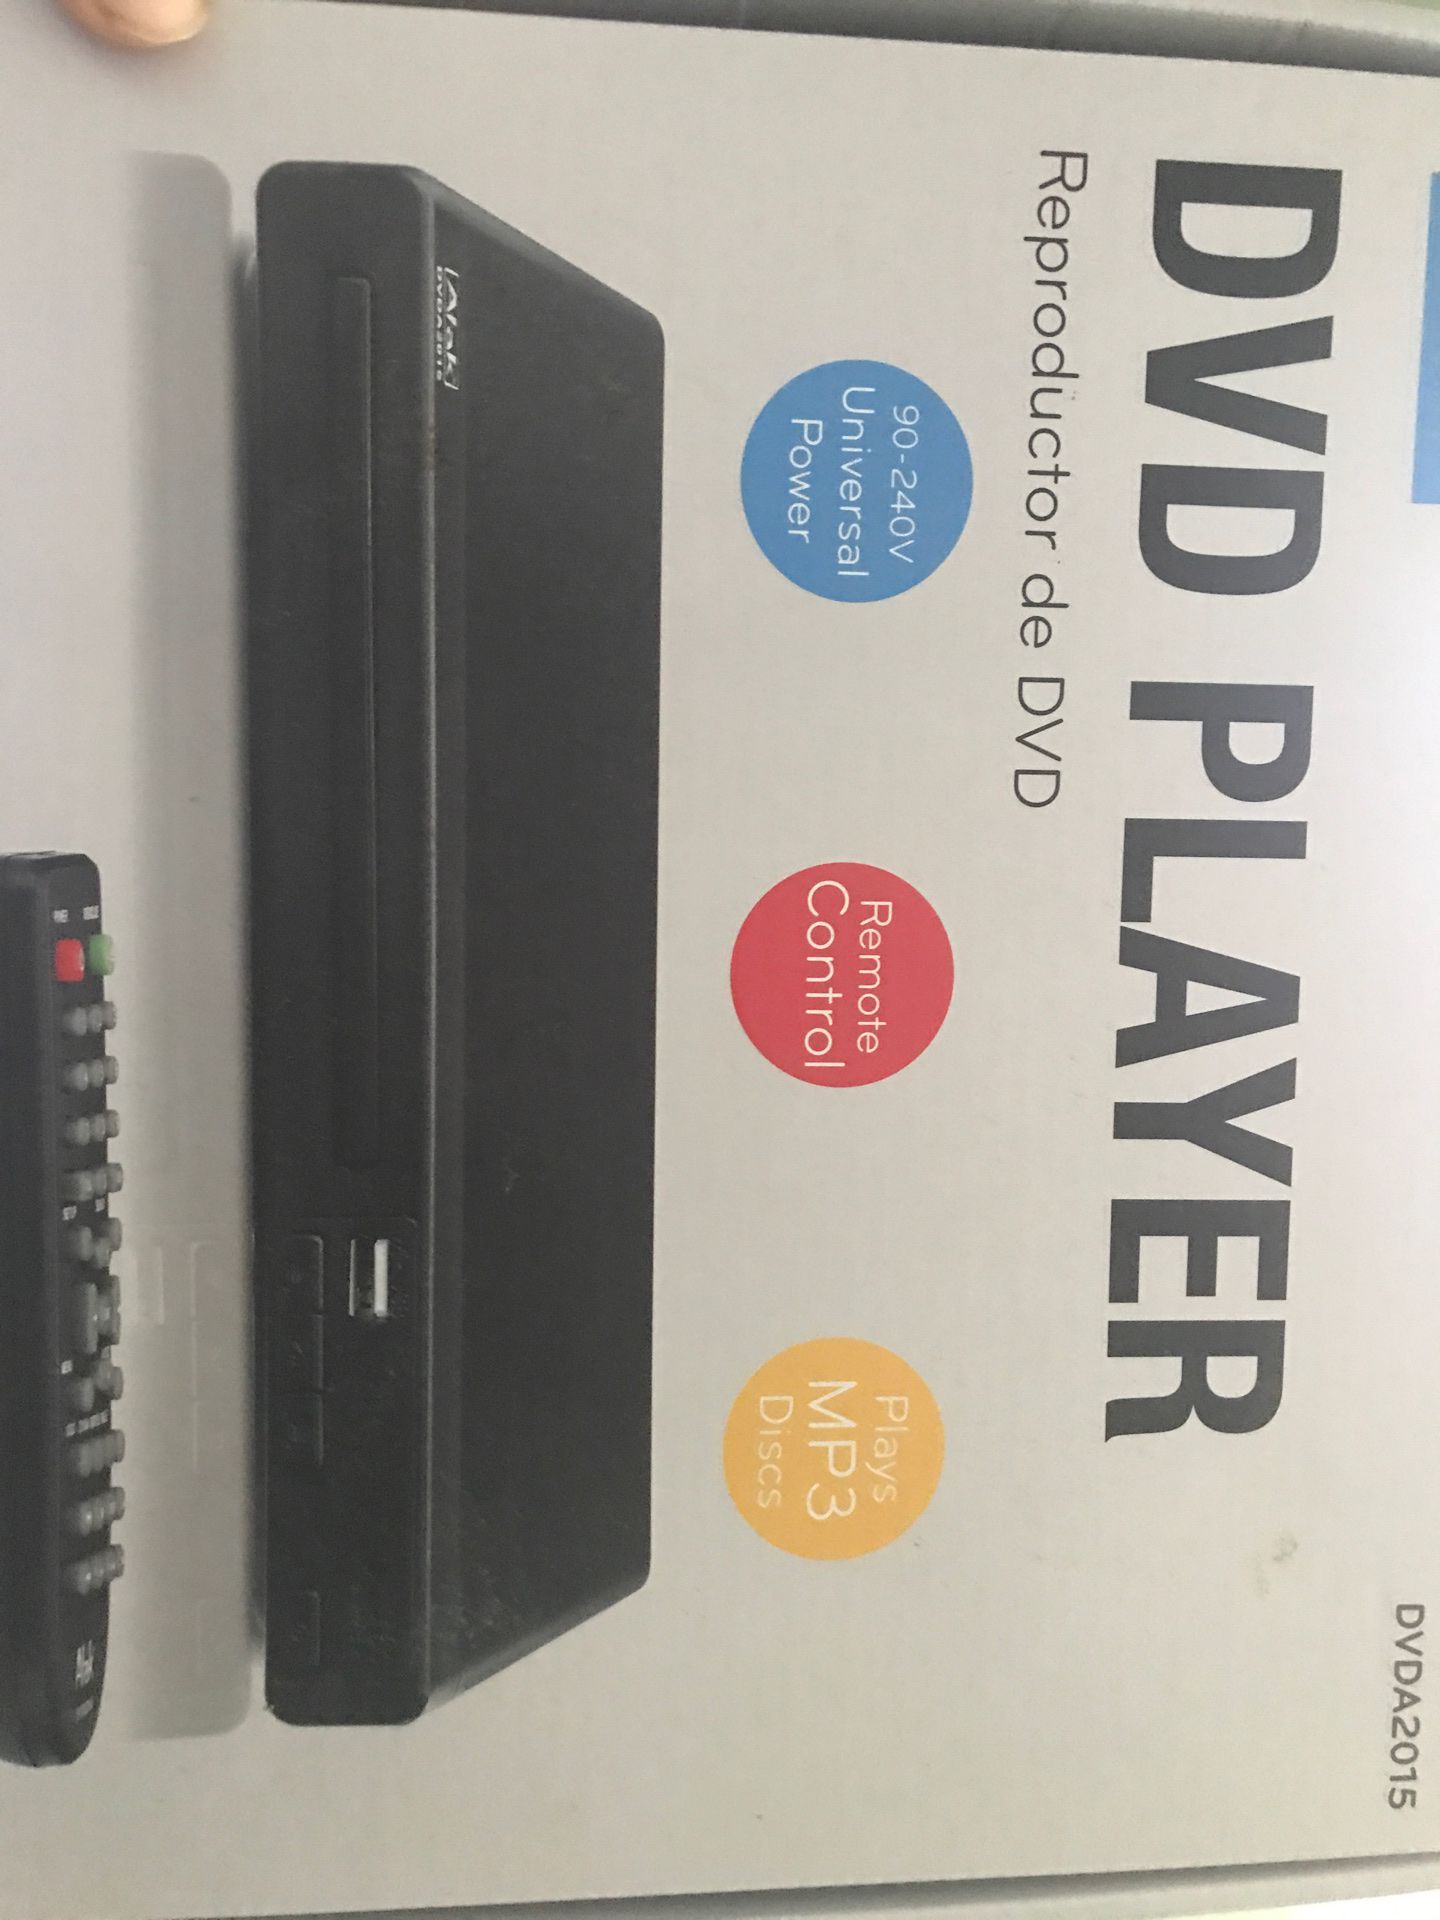 NEW PERFECT CONDITION DVD PLAYER